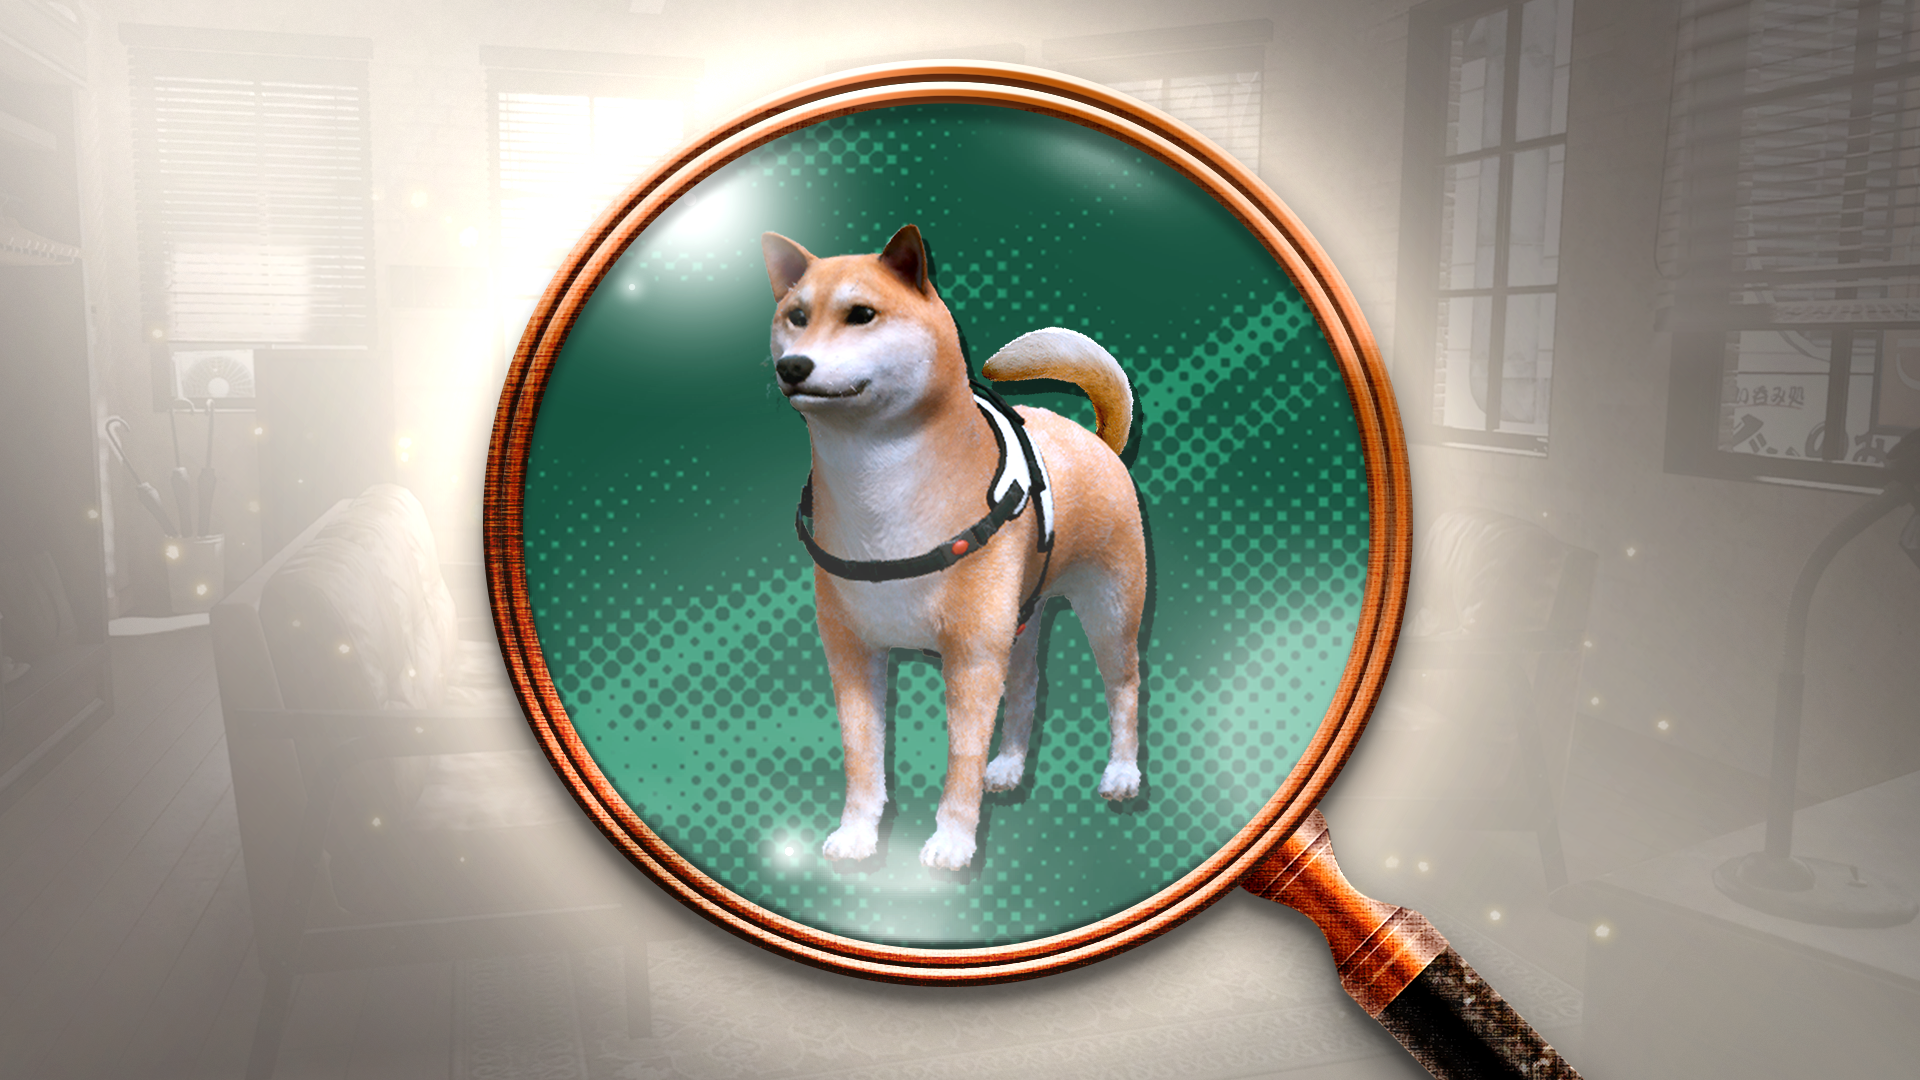 Icon for Who's a Good Boy?